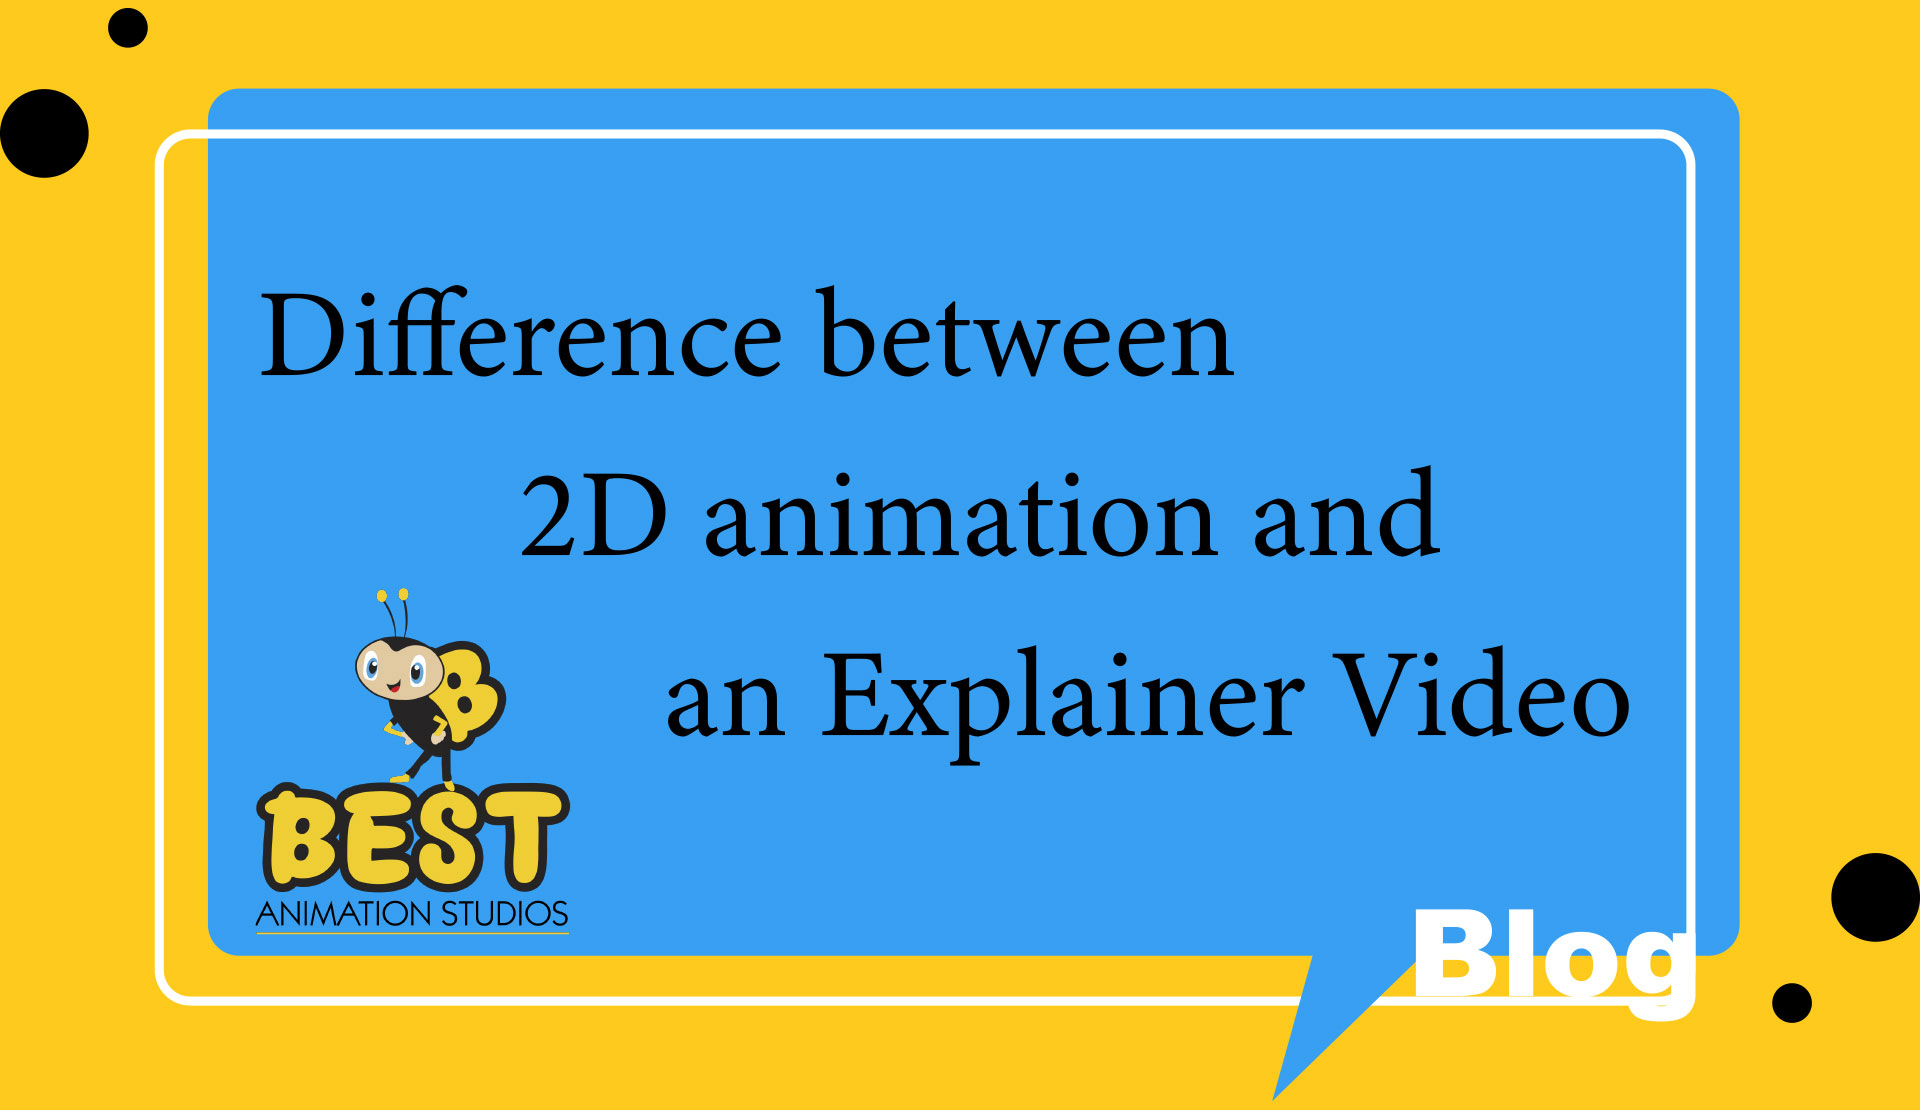 Difference between 2d animation and an Explainer Video